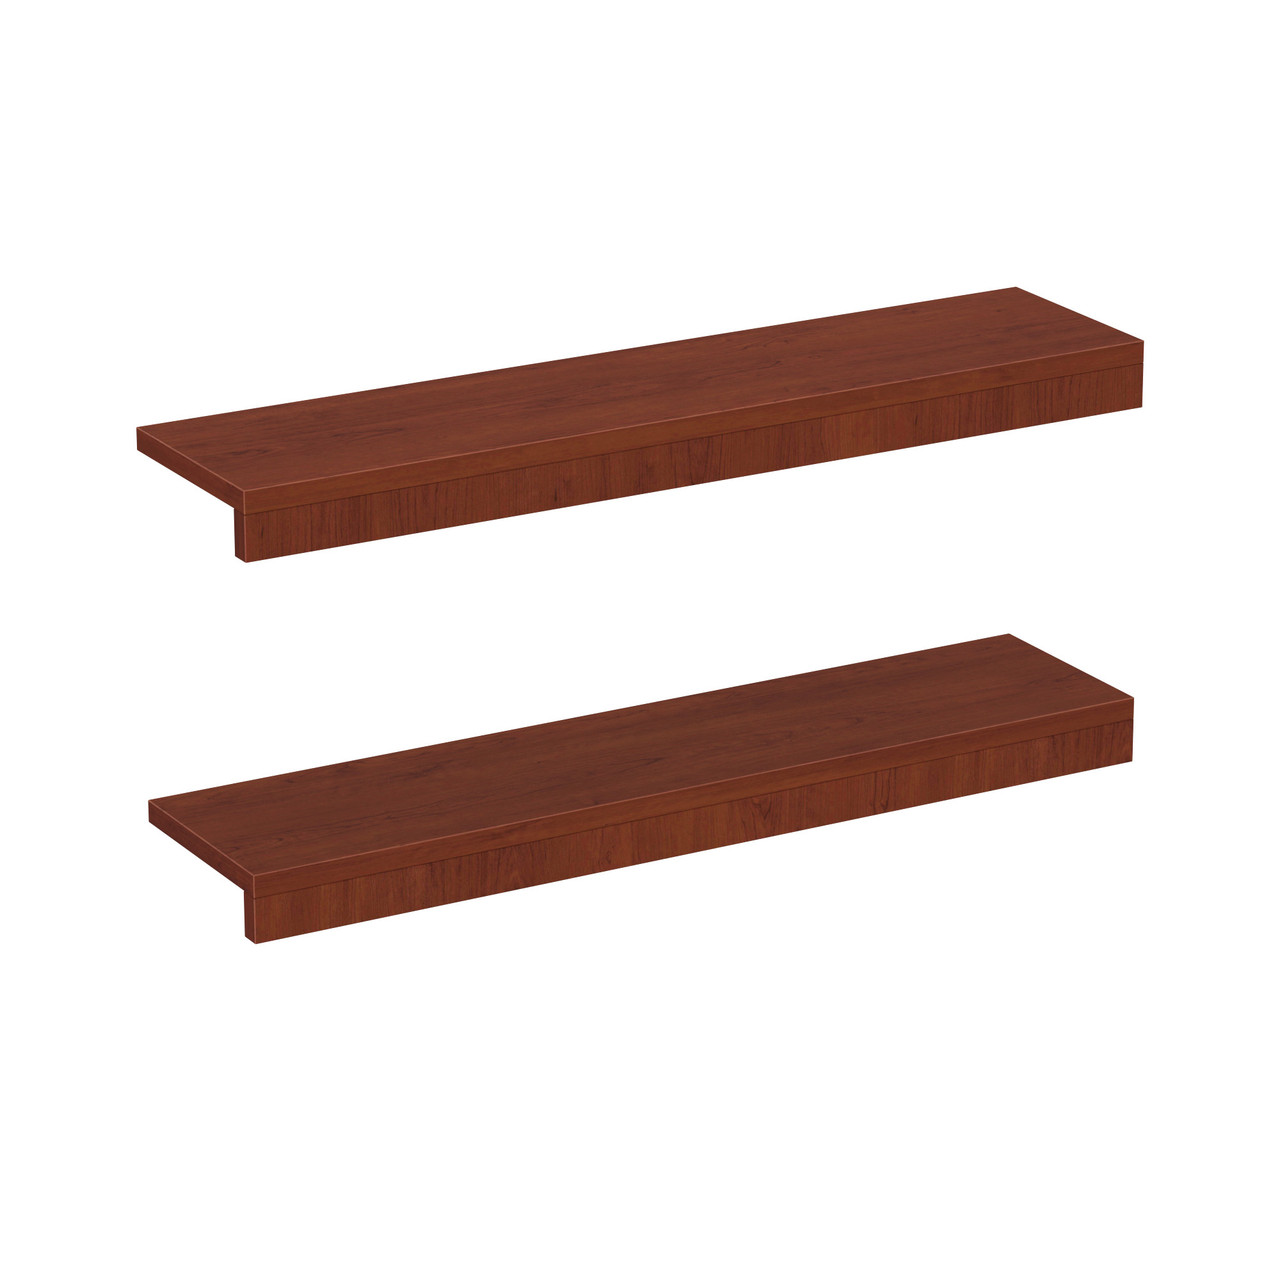 OfficeSource | OS Laminate Collection | Shelf Kit - COE Distributing